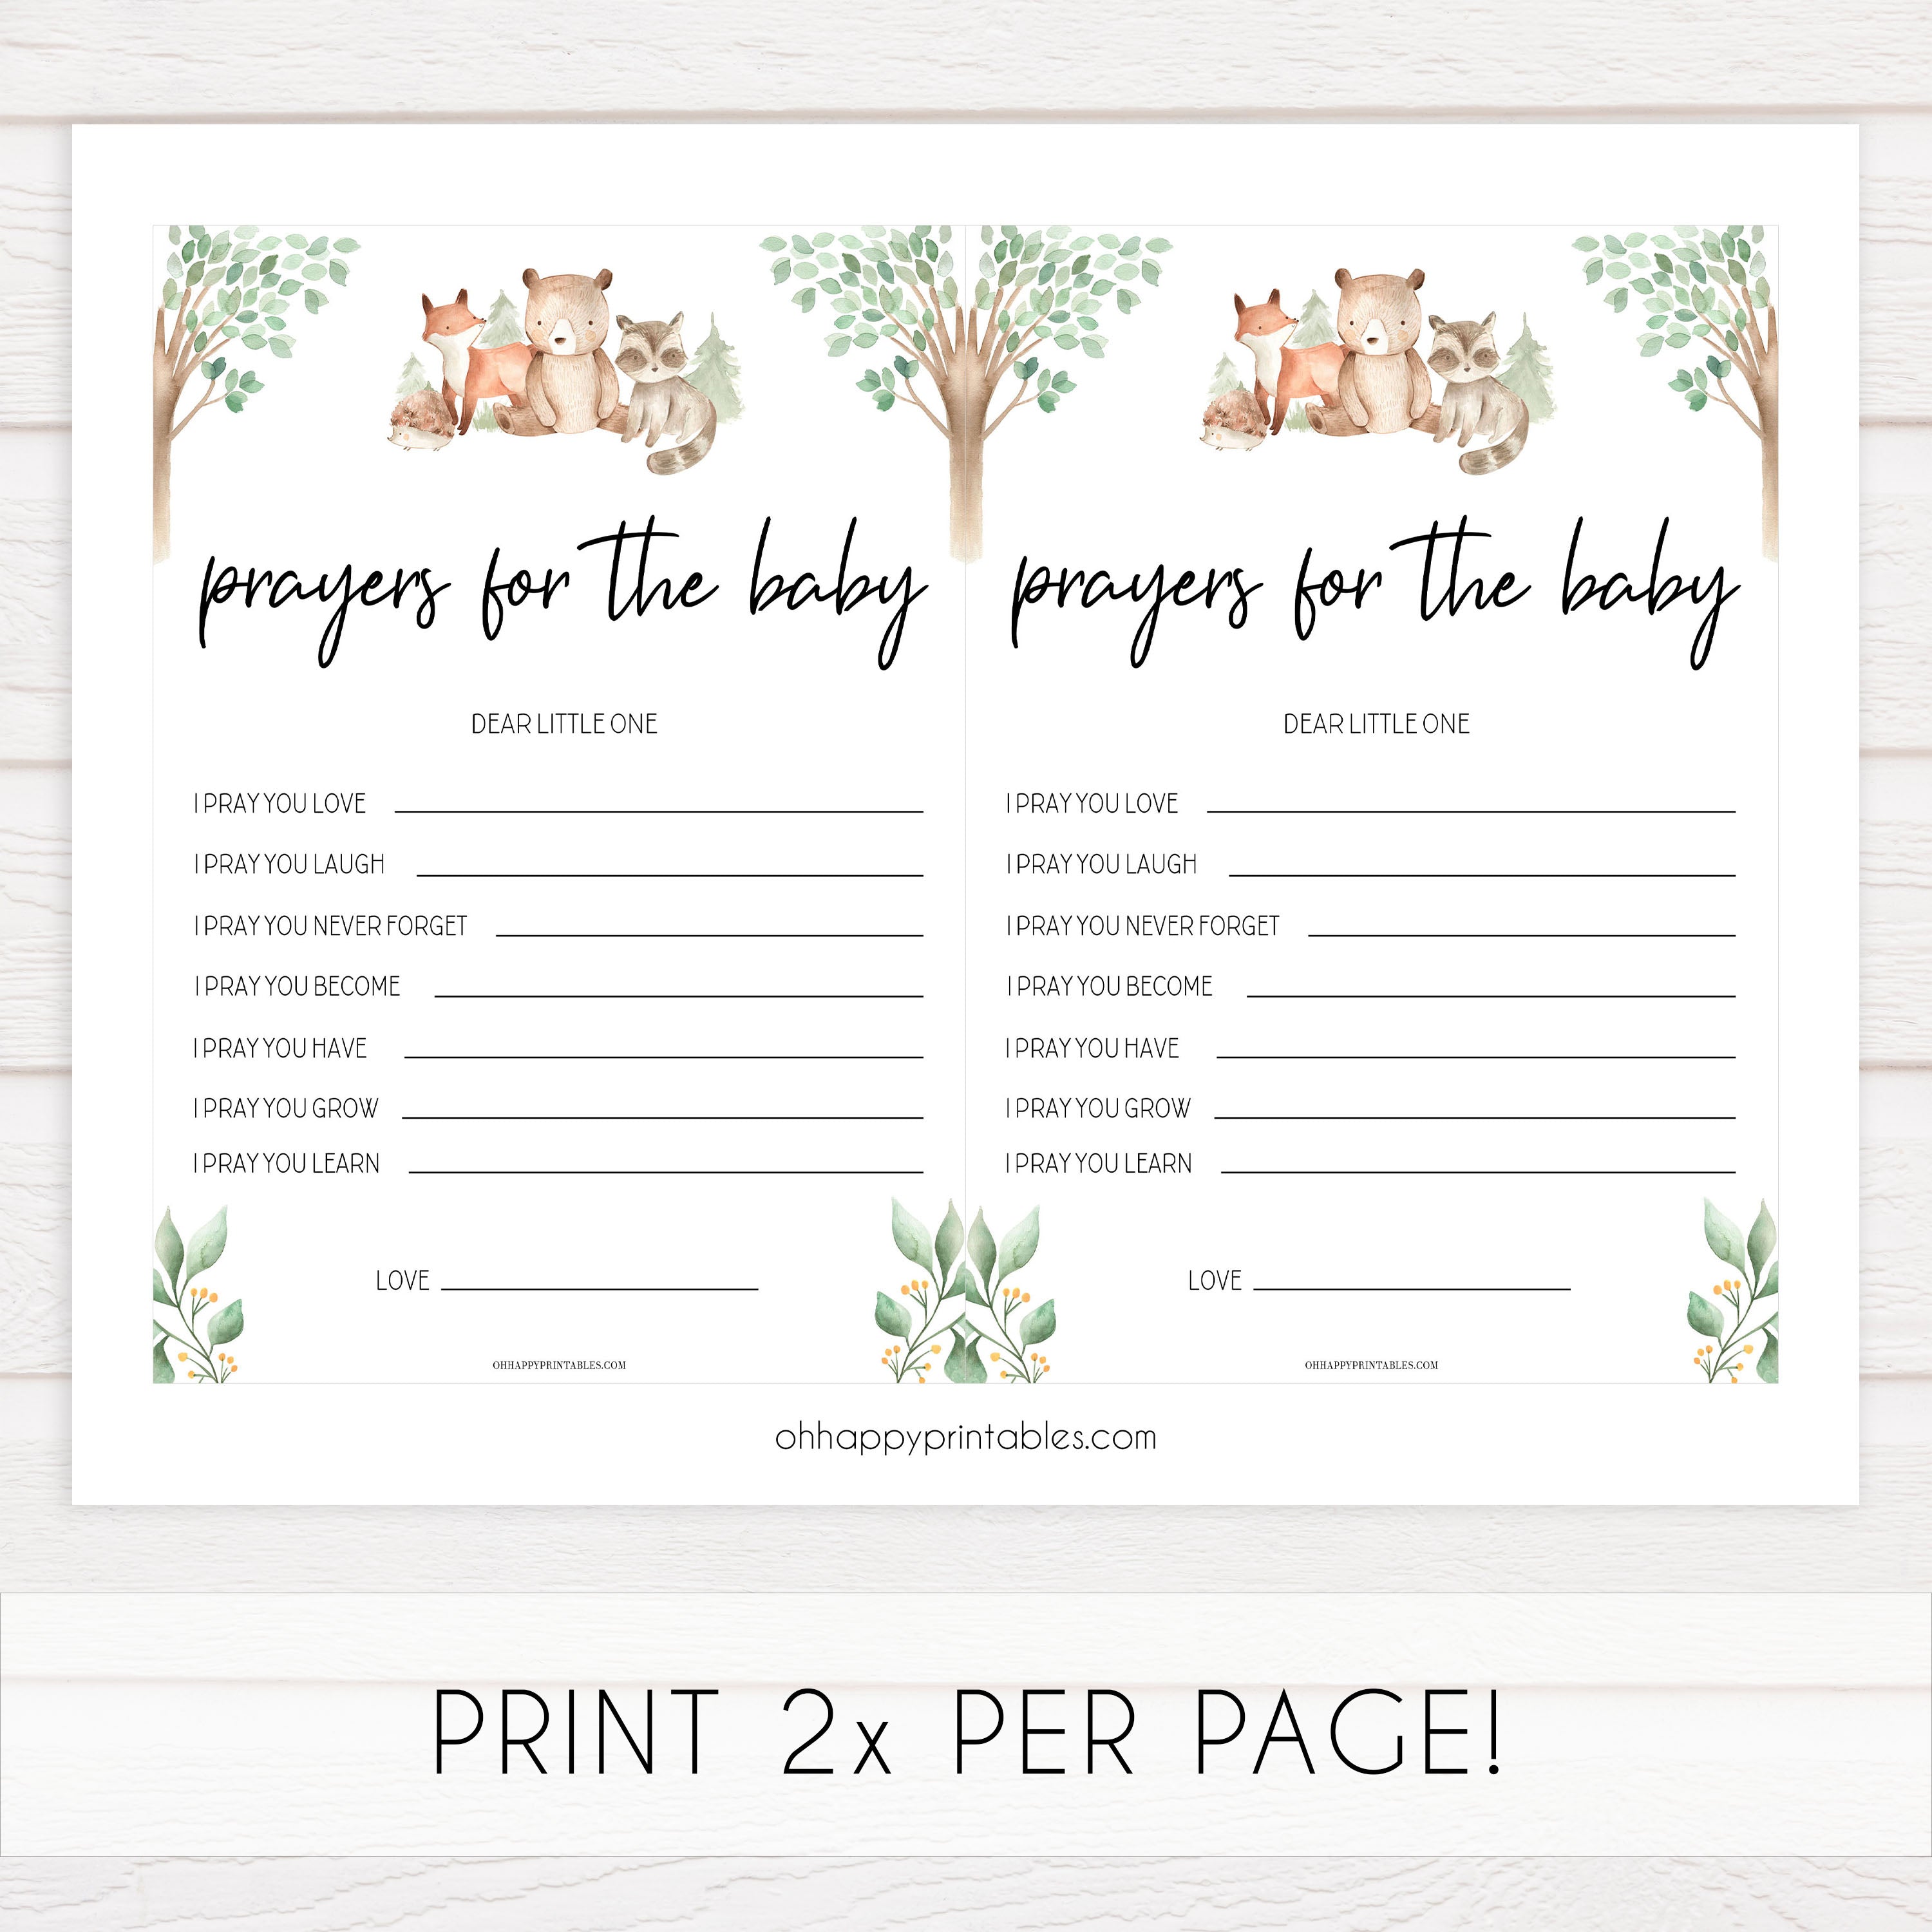 prayers for the baby game, Printable baby shower games, woodland animals baby games, baby shower games, fun baby shower ideas, top baby shower ideas, woodland baby shower, baby shower games, fun woodland animals baby shower ideas